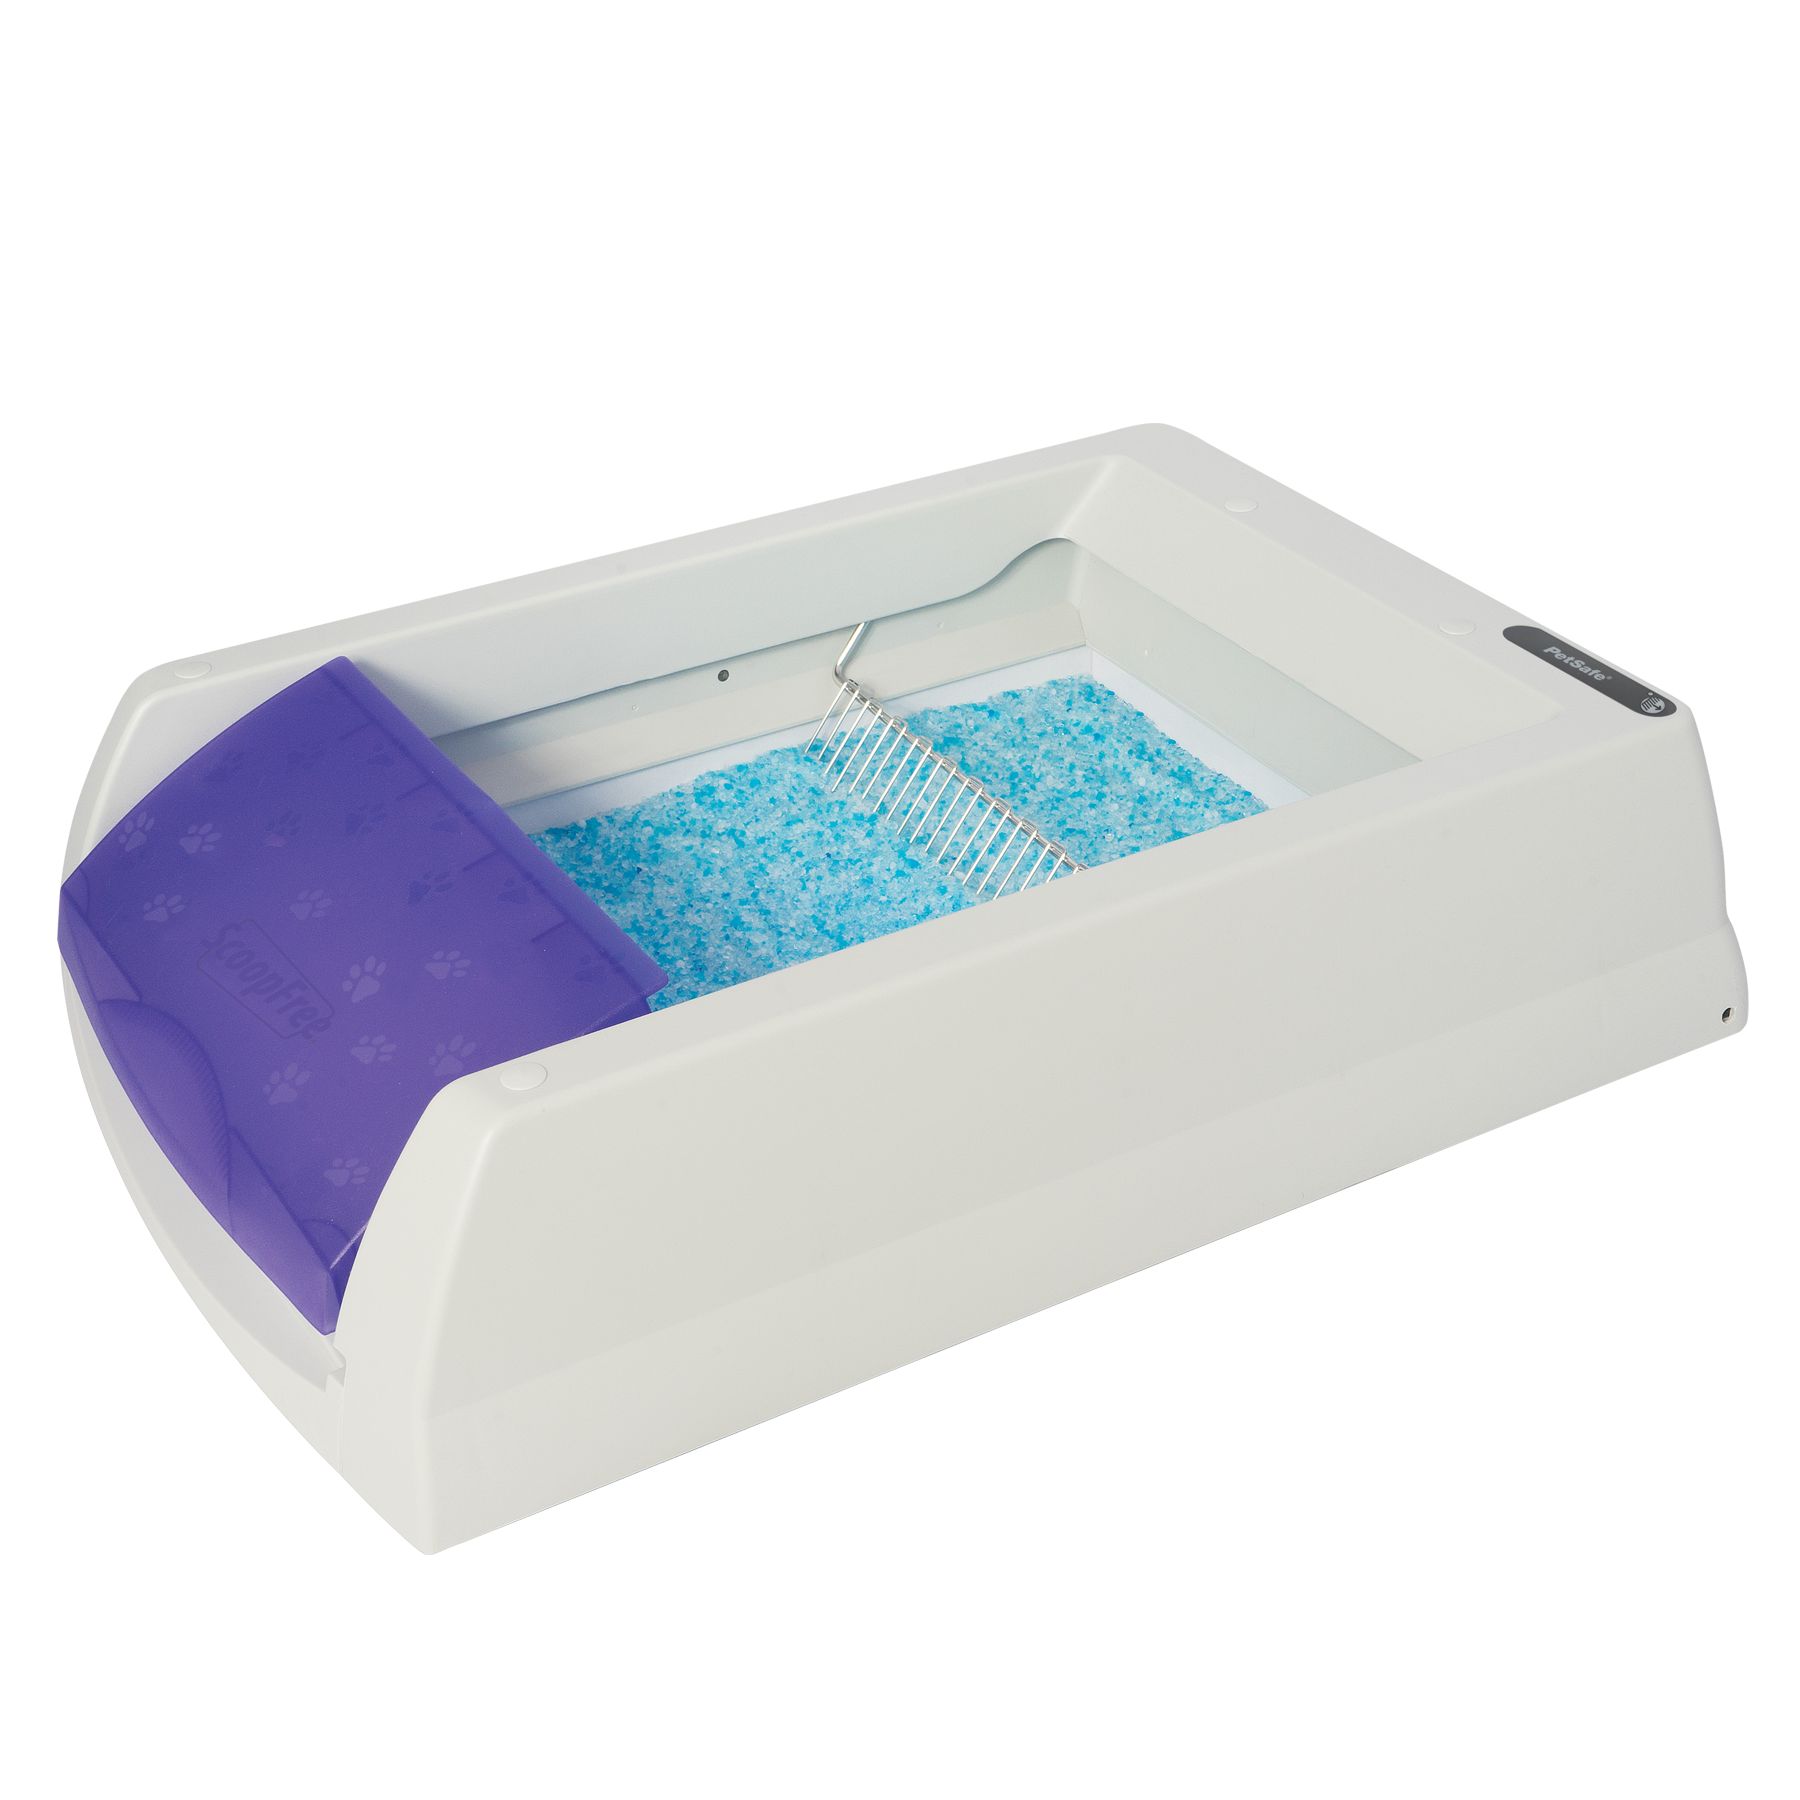 self cleaning litter box crystals